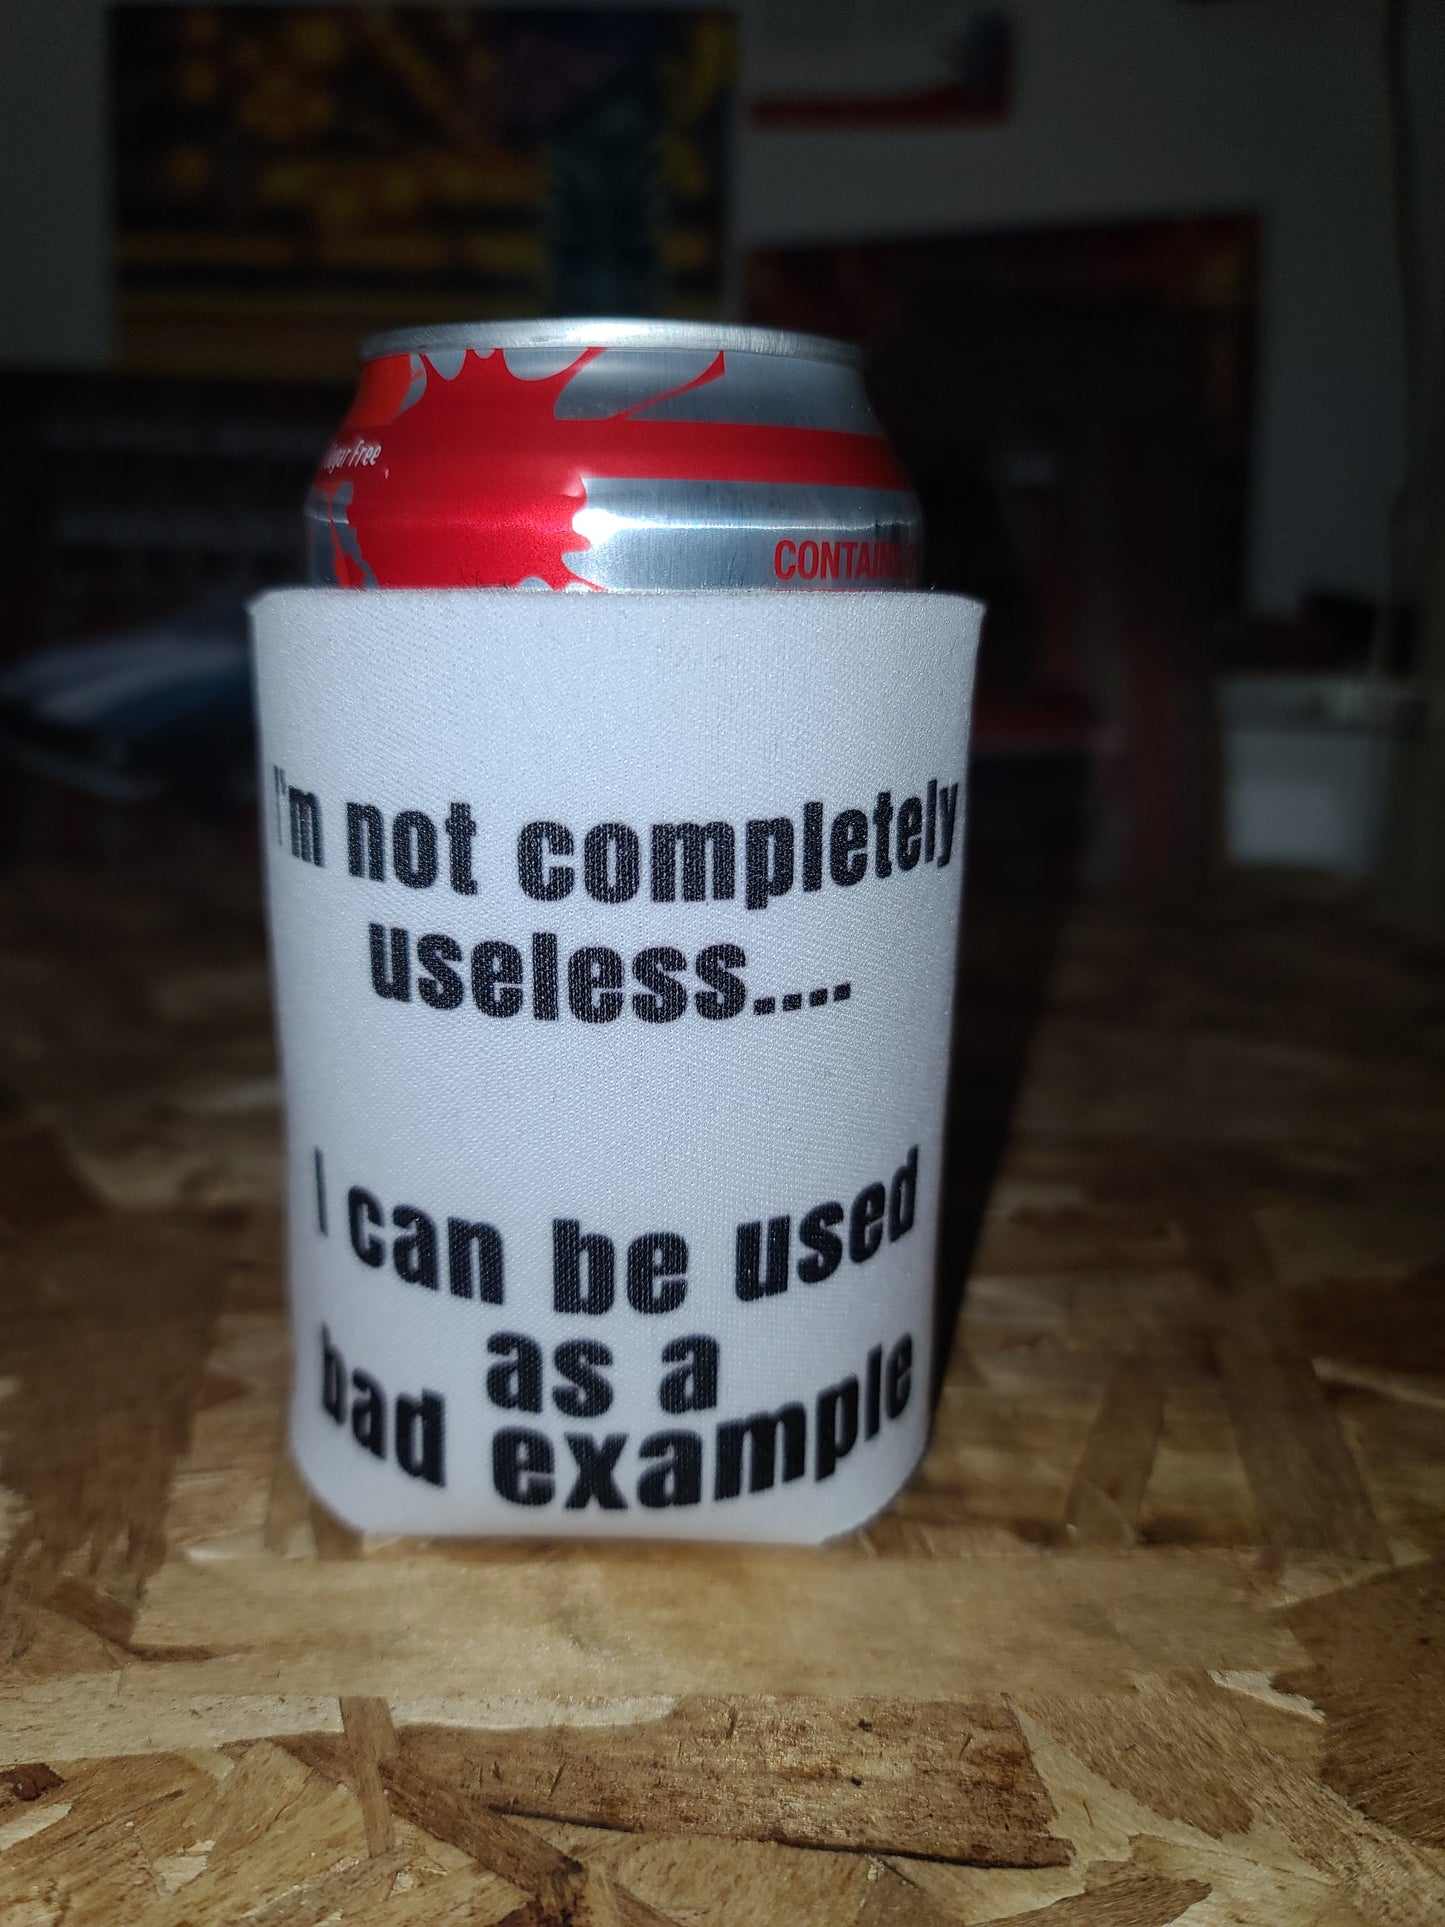 I'm not completely useless, I can be used as a bad example Can Coozie Christmas gift gift for dad gift for her gift for him gift for mom gift for wife Koozie